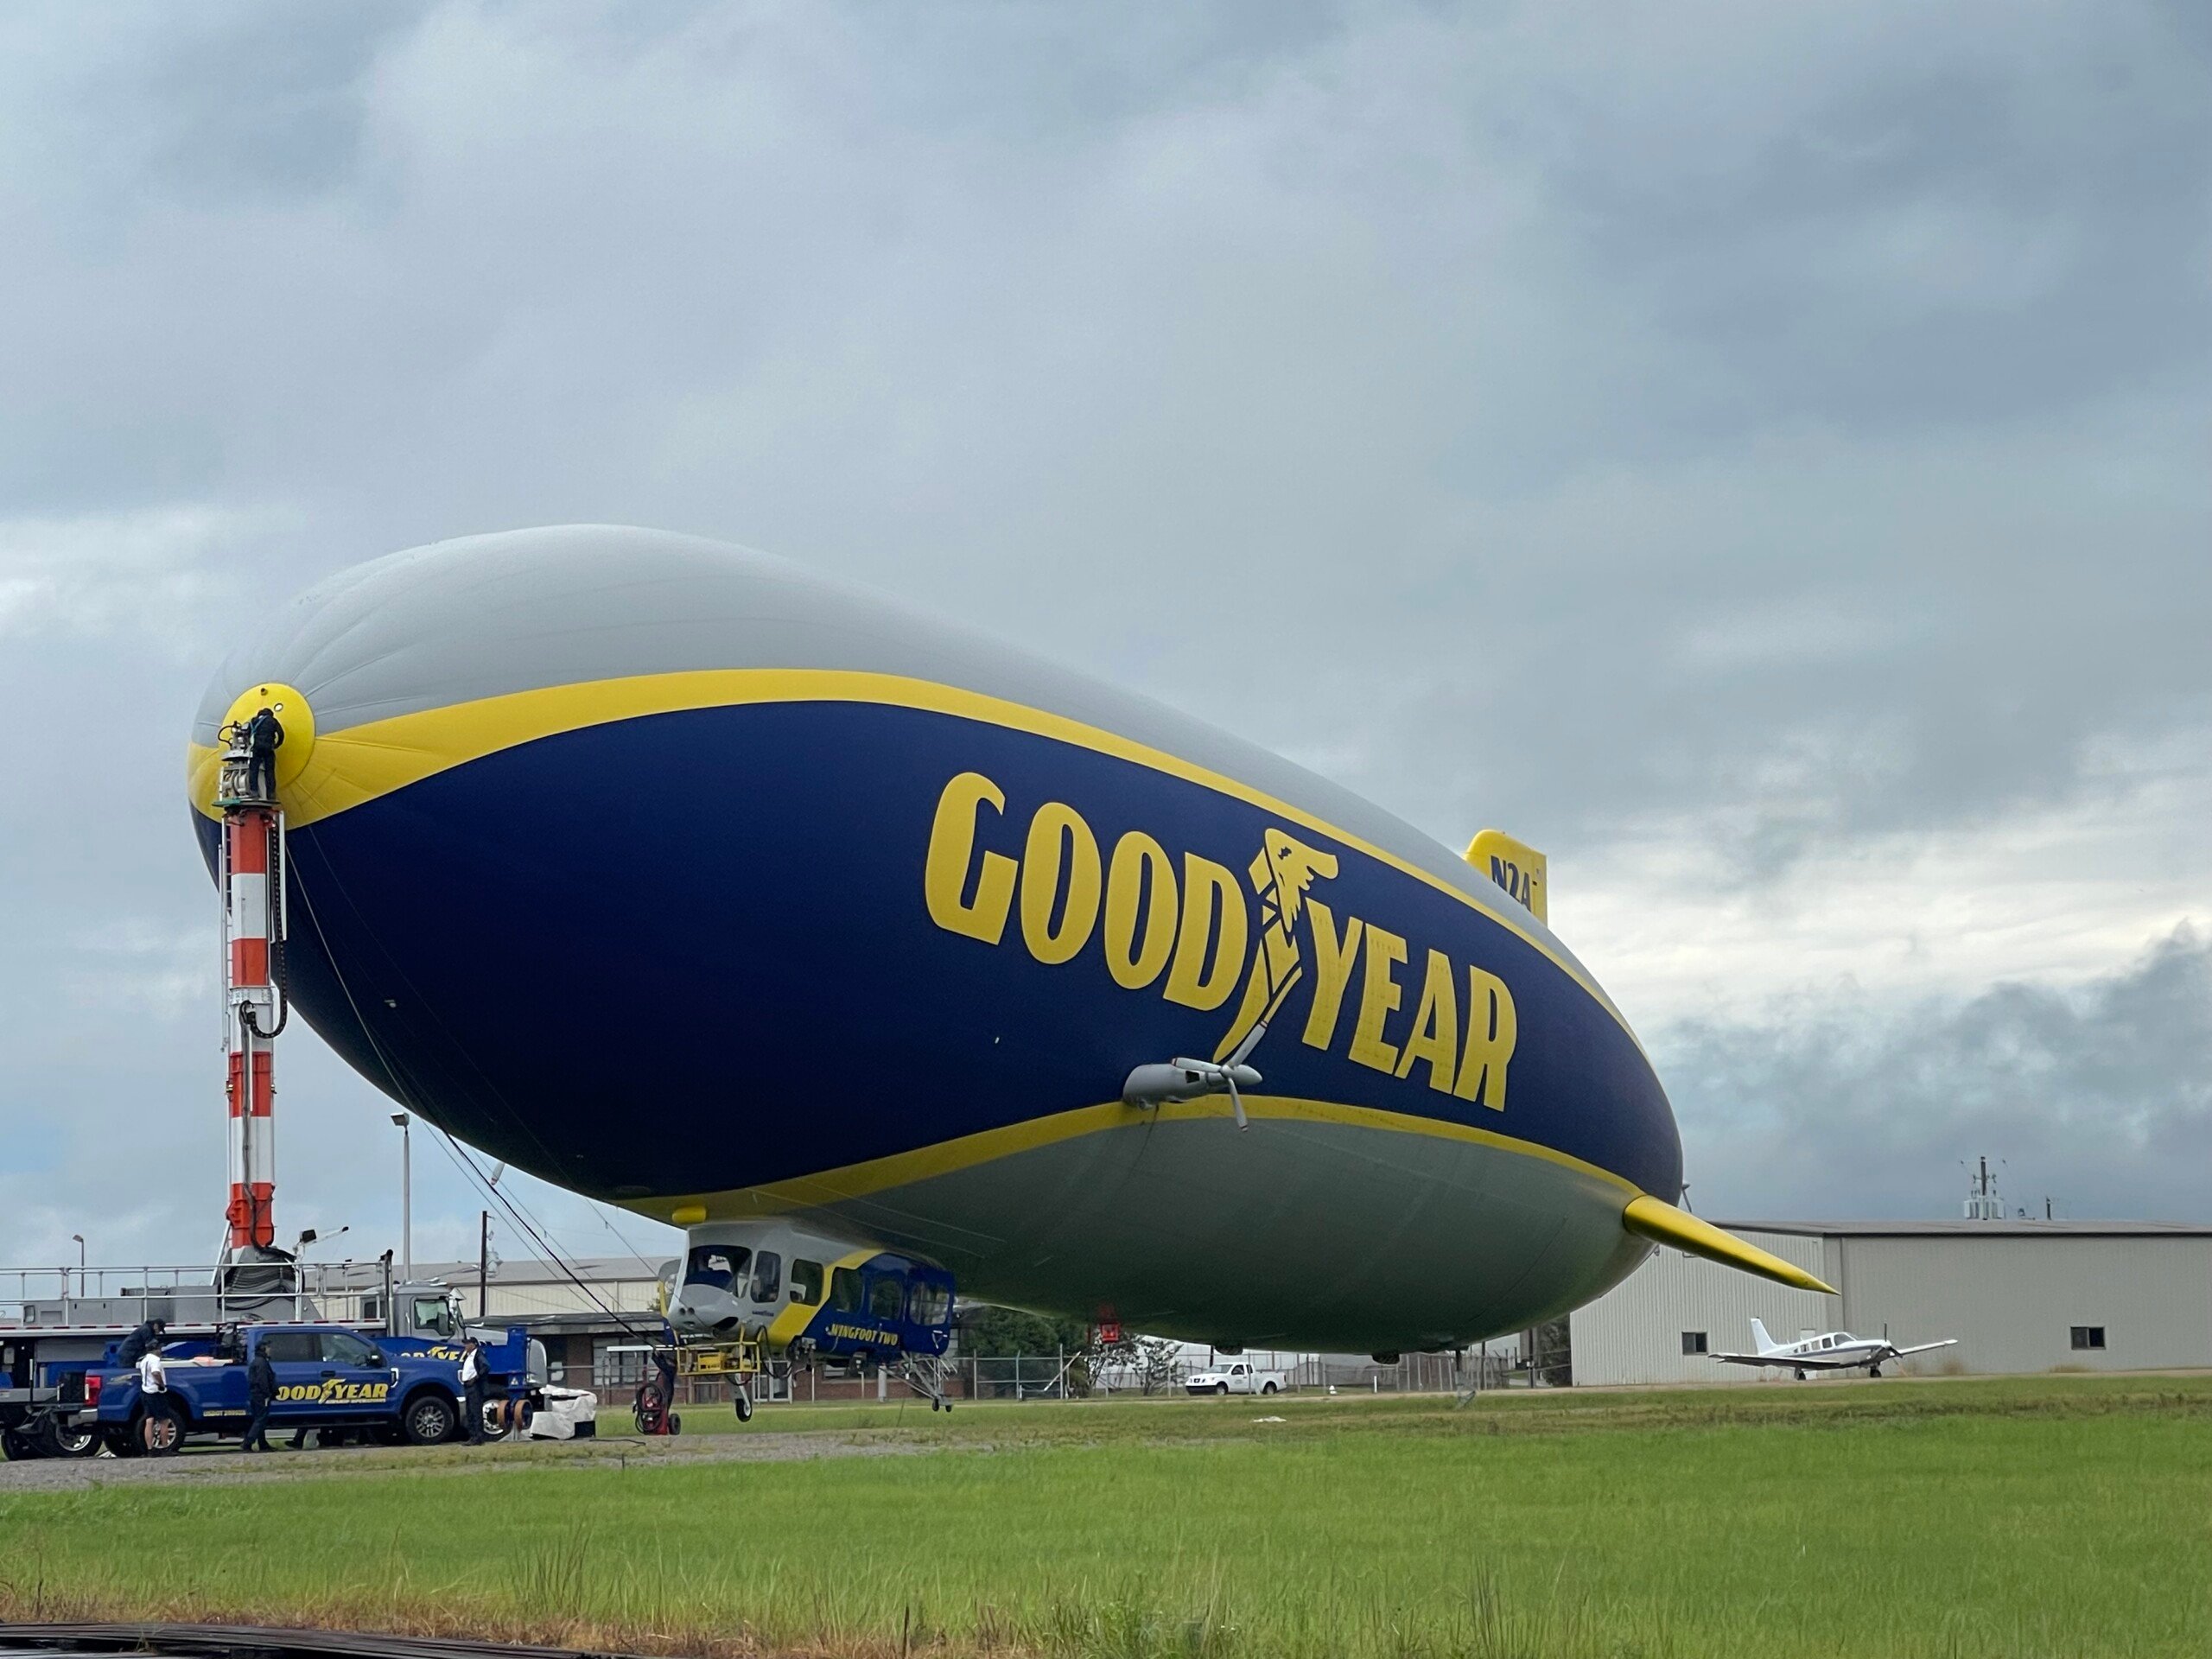 goodyear-gives-thanks-to-cooper-tire-employees-with-rides-on-iconic-blimp